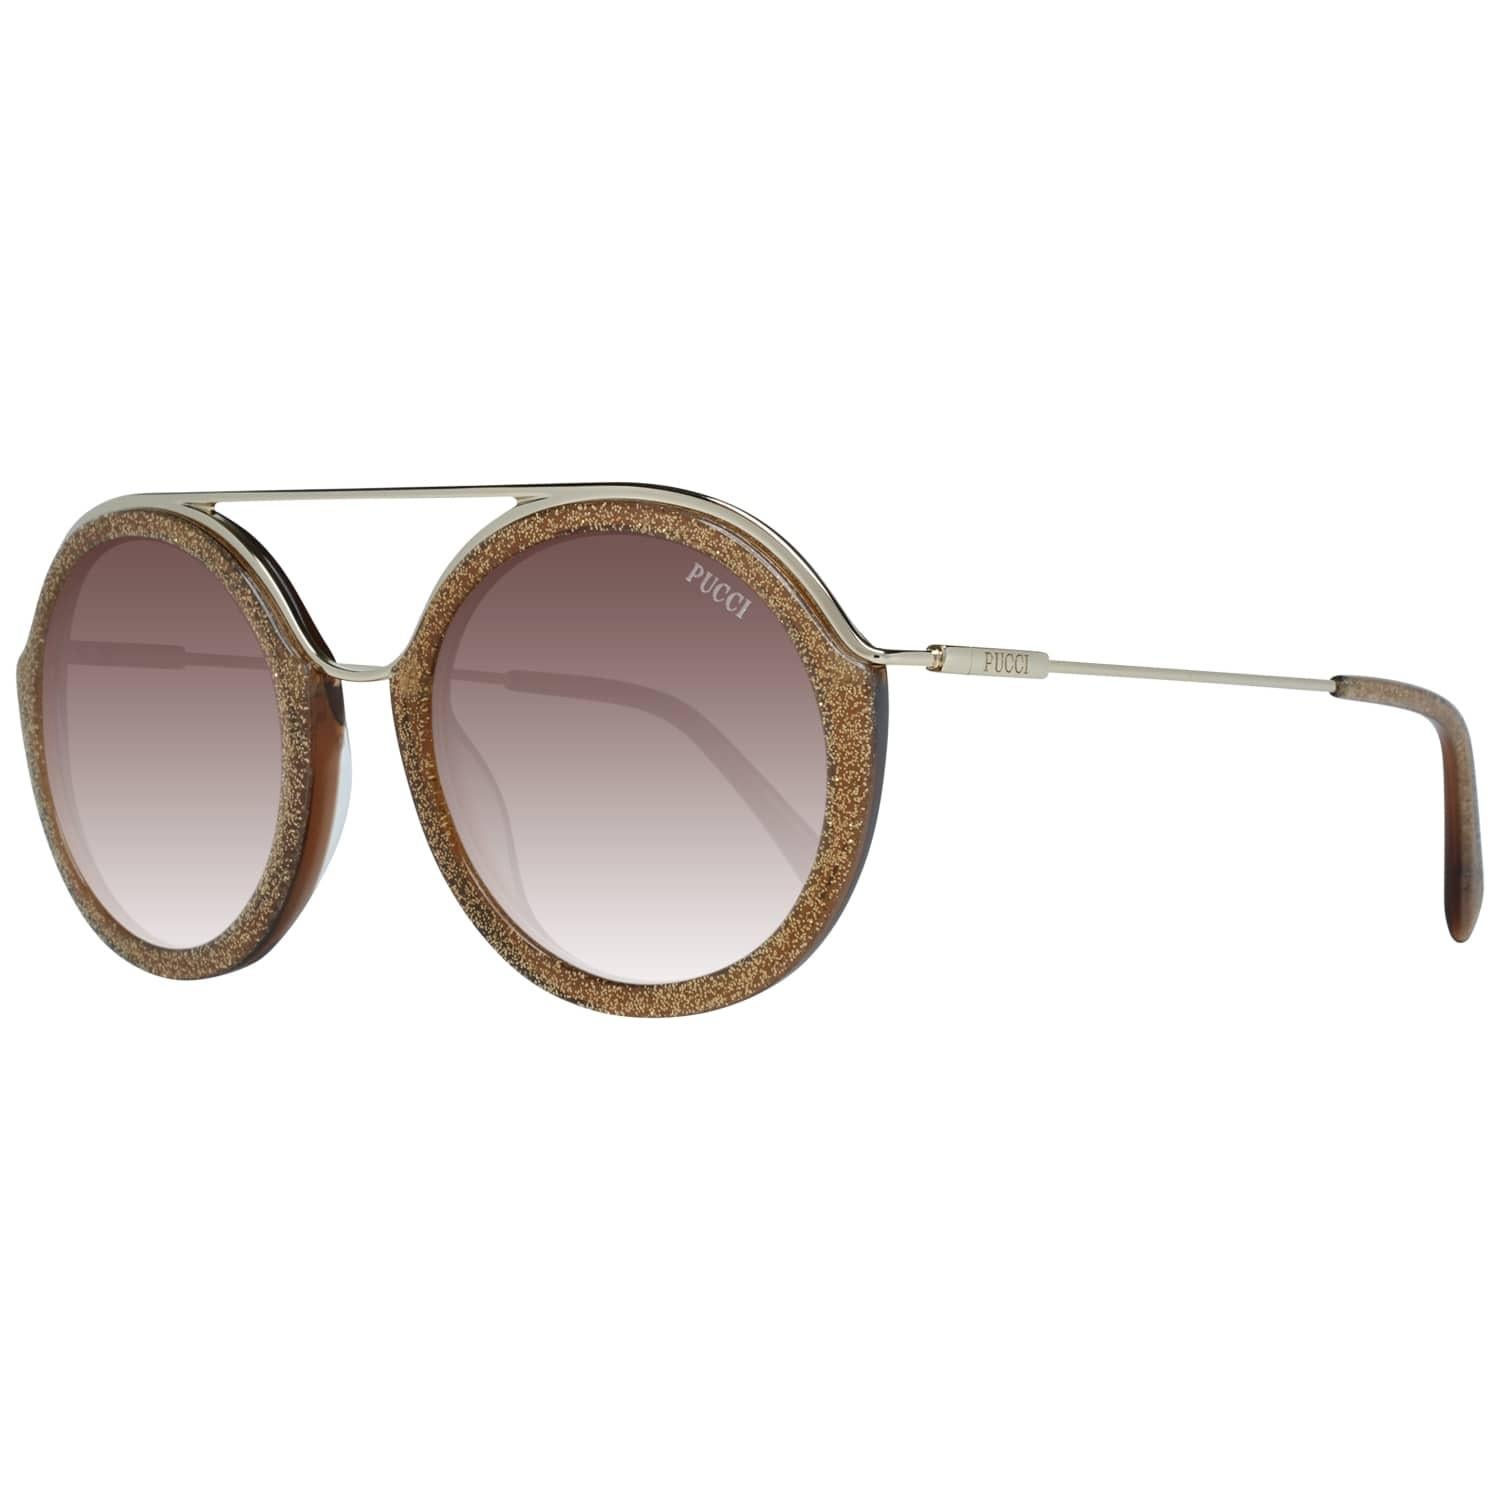 Details

MATERIAL: Metal

COLOR: Gold

MODEL: EP0013 5247F

GENDER: Women

COUNTRY OF MANUFACTURE: Italy

TYPE: Sunglasses

ORIGINAL CASE?: Yes

STYLE: Oval

OCCASION: Casual

FEATURES: Lightweight

LENS COLOR: Brown

LENS TECHNOLOGY: Gradient

YEAR